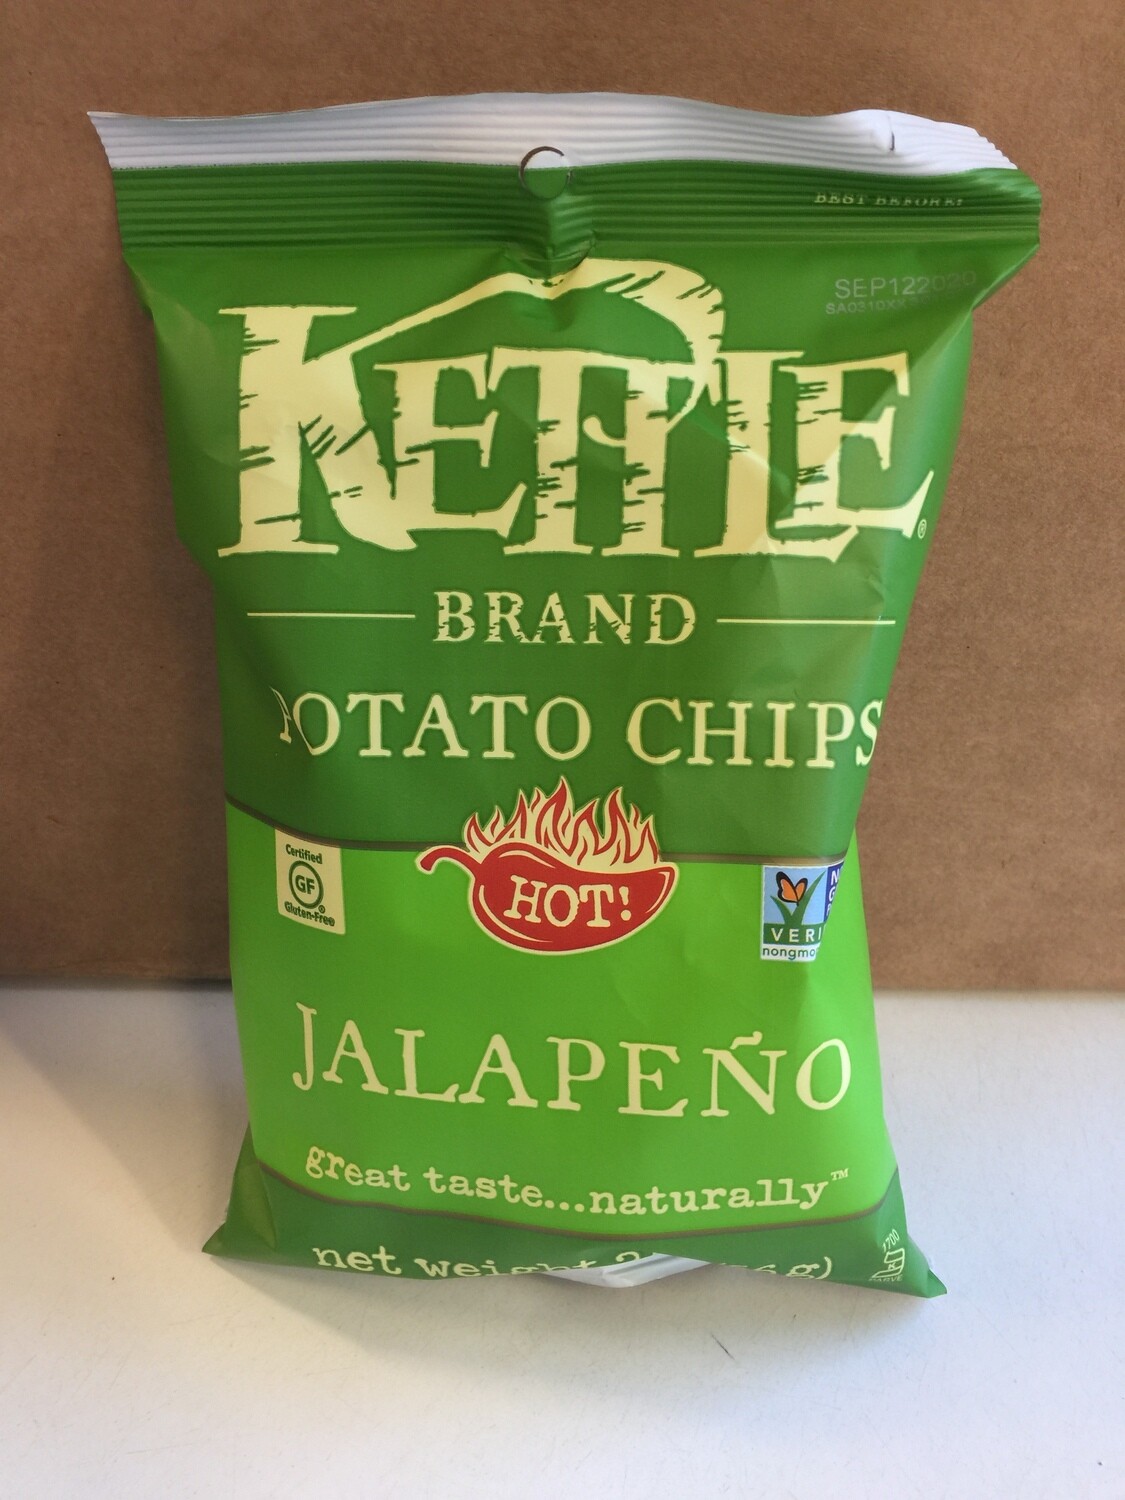 Chips / Small Bag / Kettle Chips Jalapeno, 2 oz